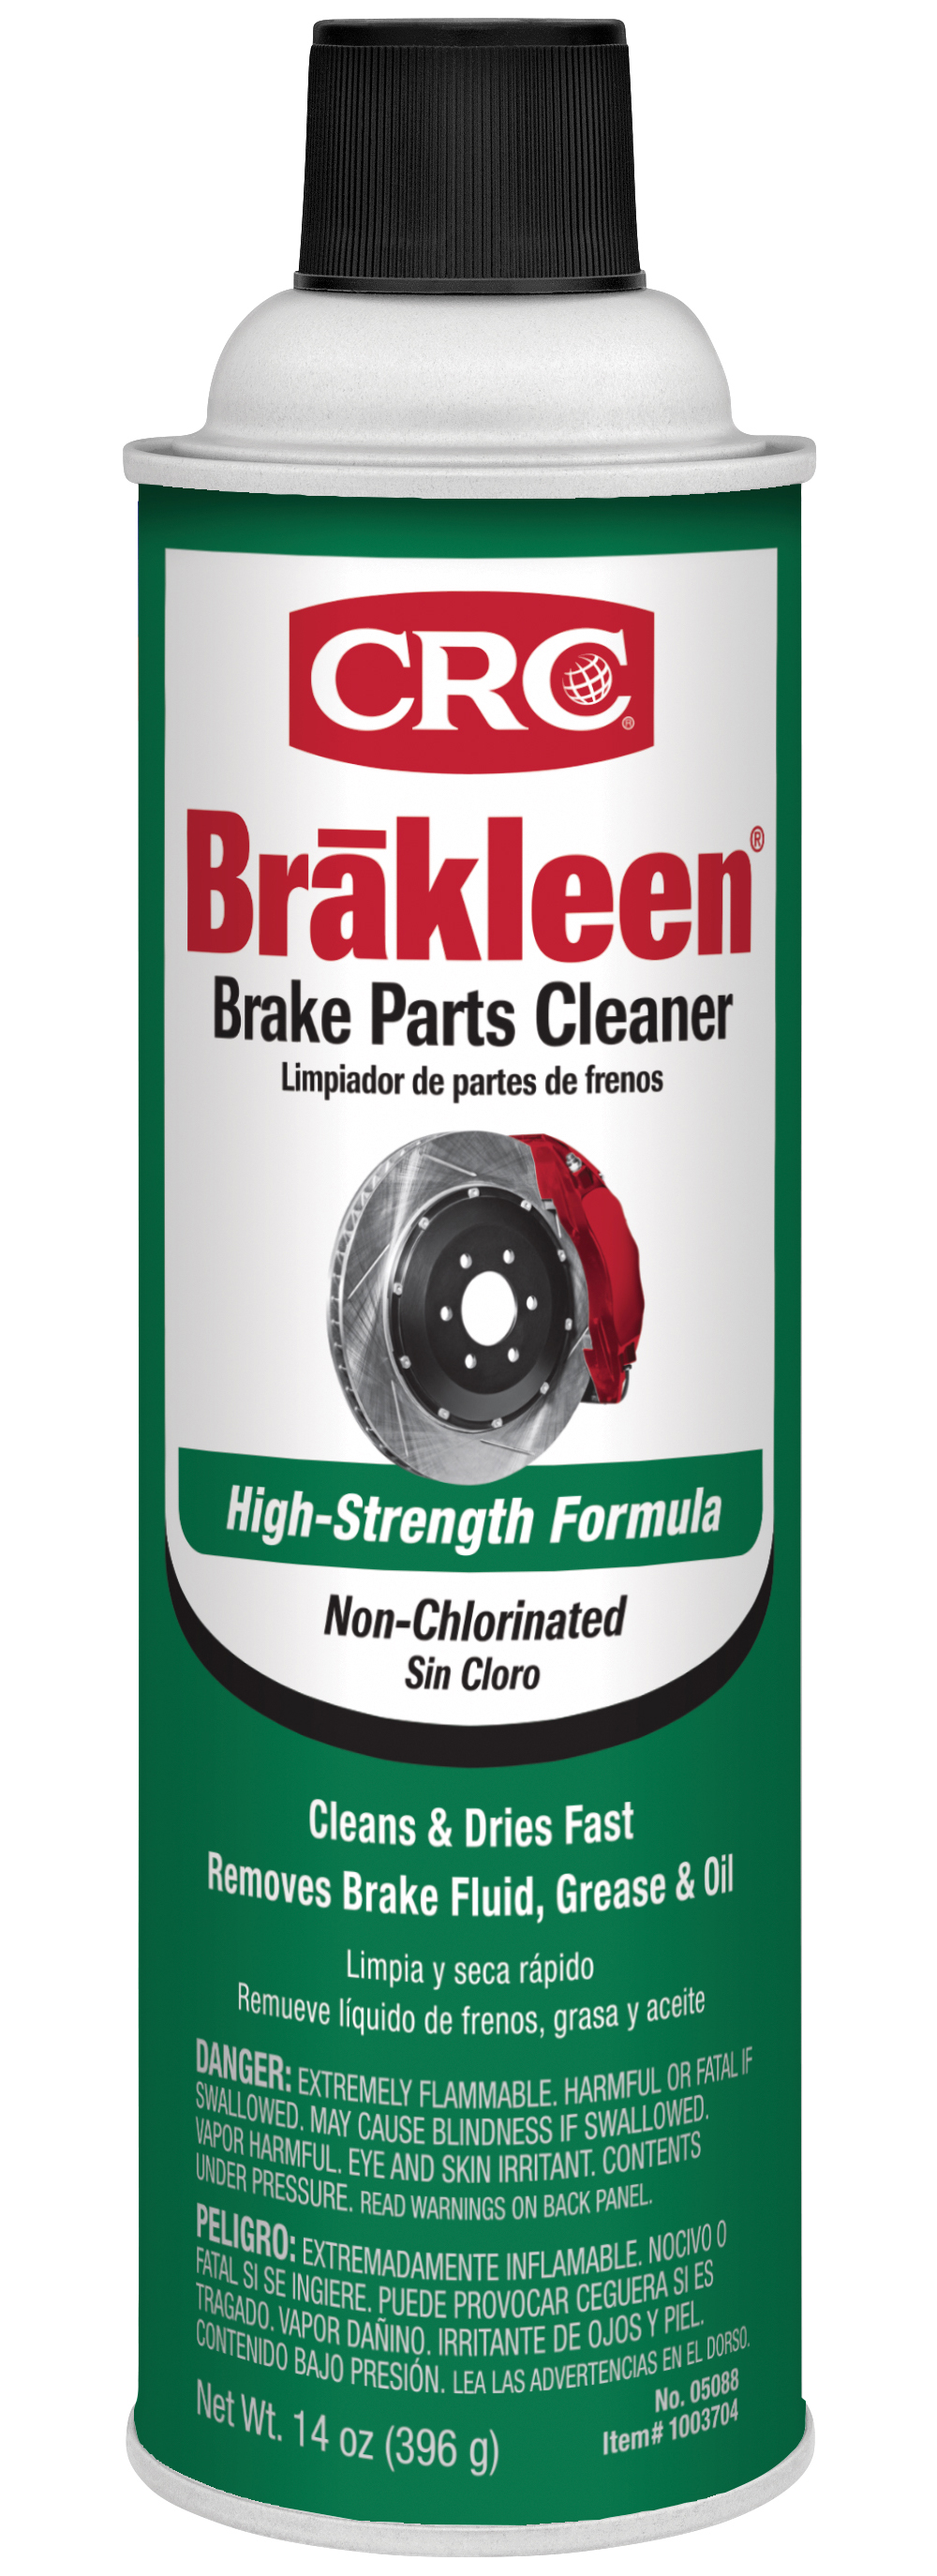 CRC Non-chlorinated Brake Parts Cleaner: Solvent, Liquid, Non-Chlorinated,  Flammable, Bottle